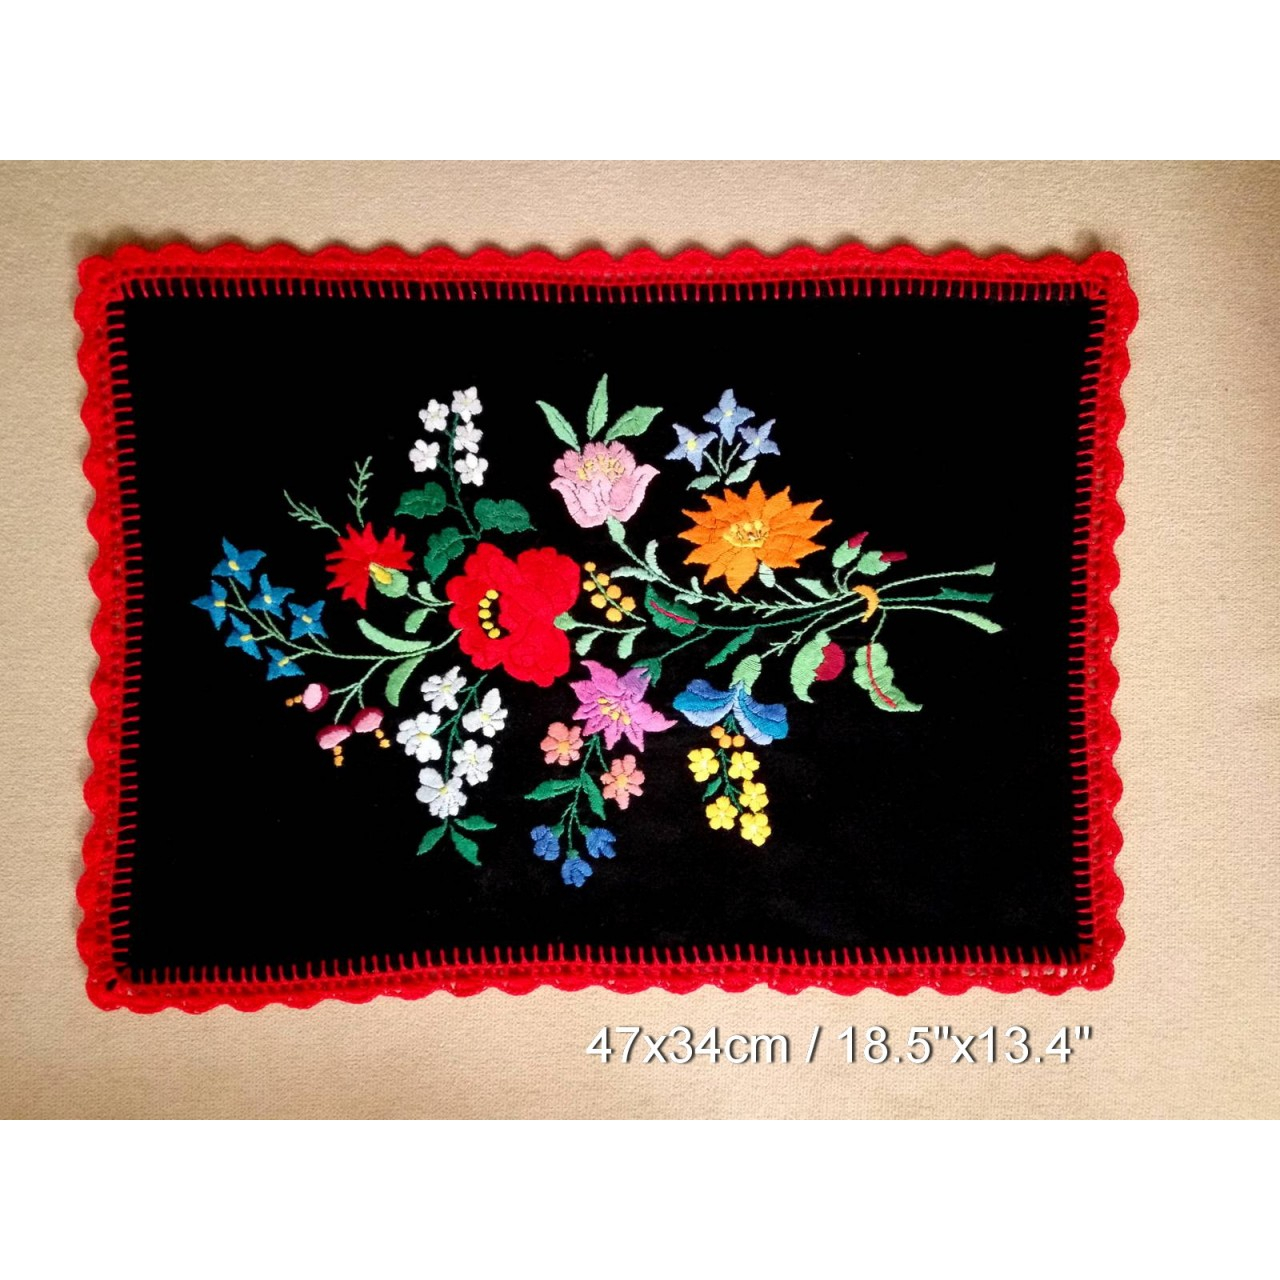 Vintage Floral Embroidery Patterns Black Tablecloth With Crocheted Edge Old Floral Motives Kaldoi